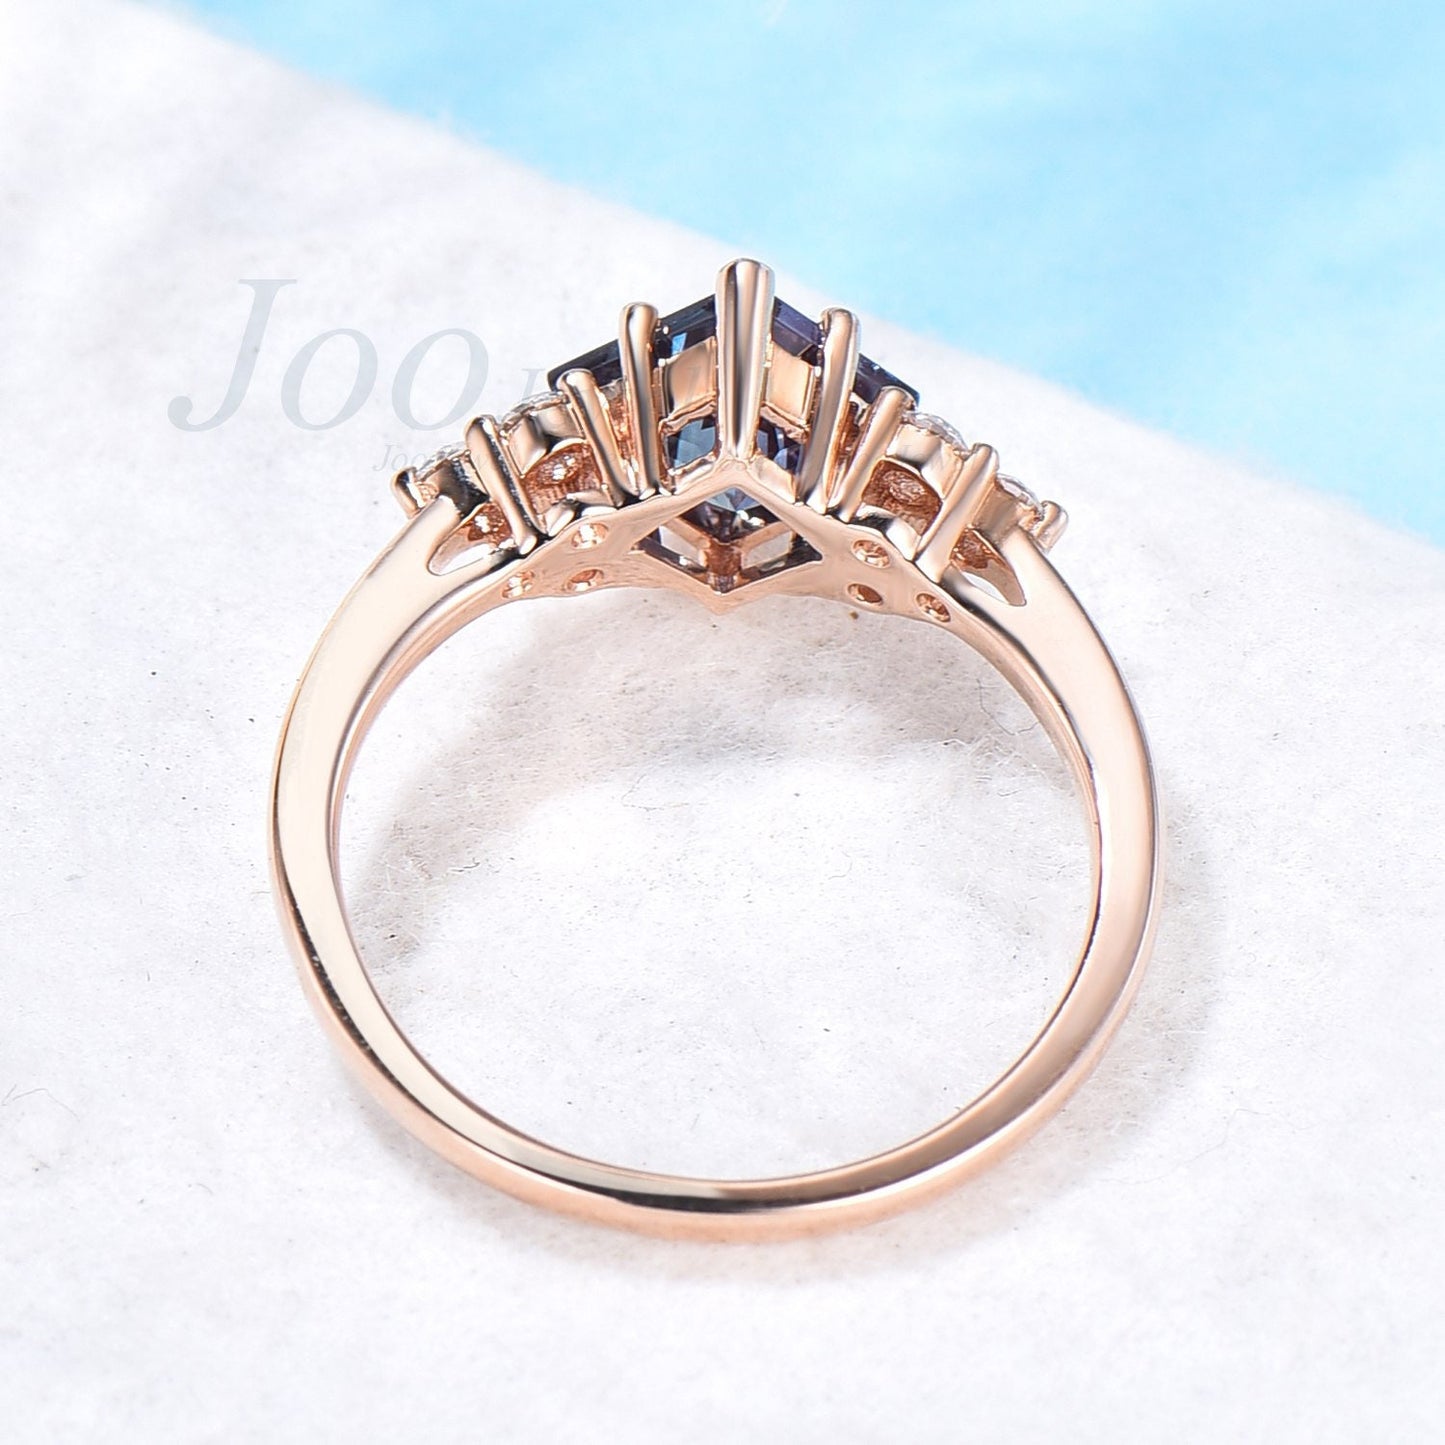 Princess Cut Alexandrite Engagement Ring Color Changing Alexandrite Ring Vintage Rose Gold Moissanite Promise Ring June Birthstone Jewelry